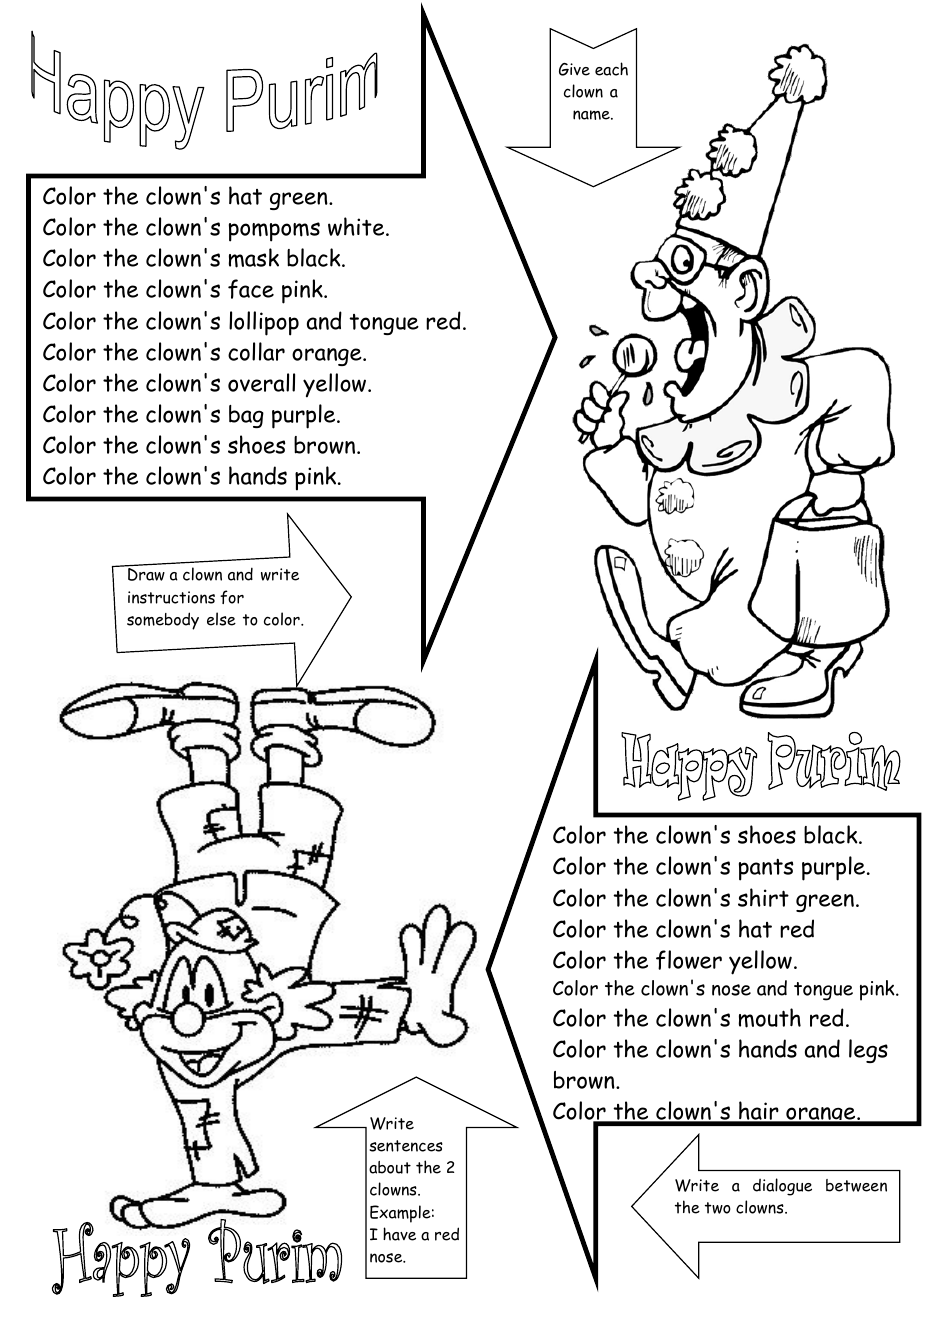 Clown Coloring Page - Printable and Fun to Color